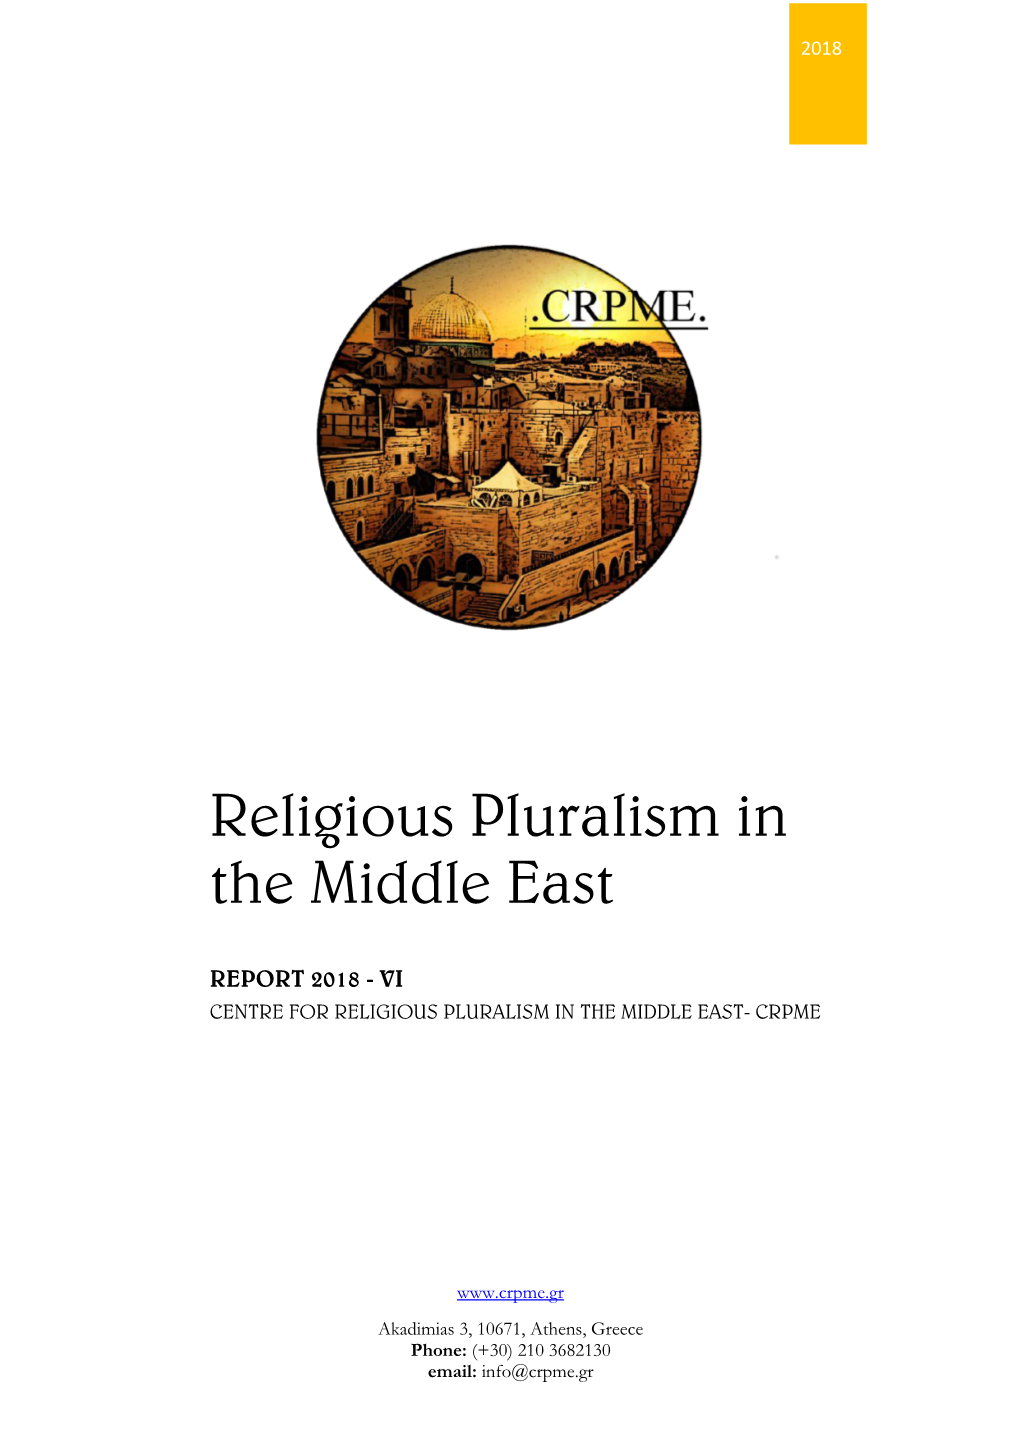 Religious Pluralism in the Middle East